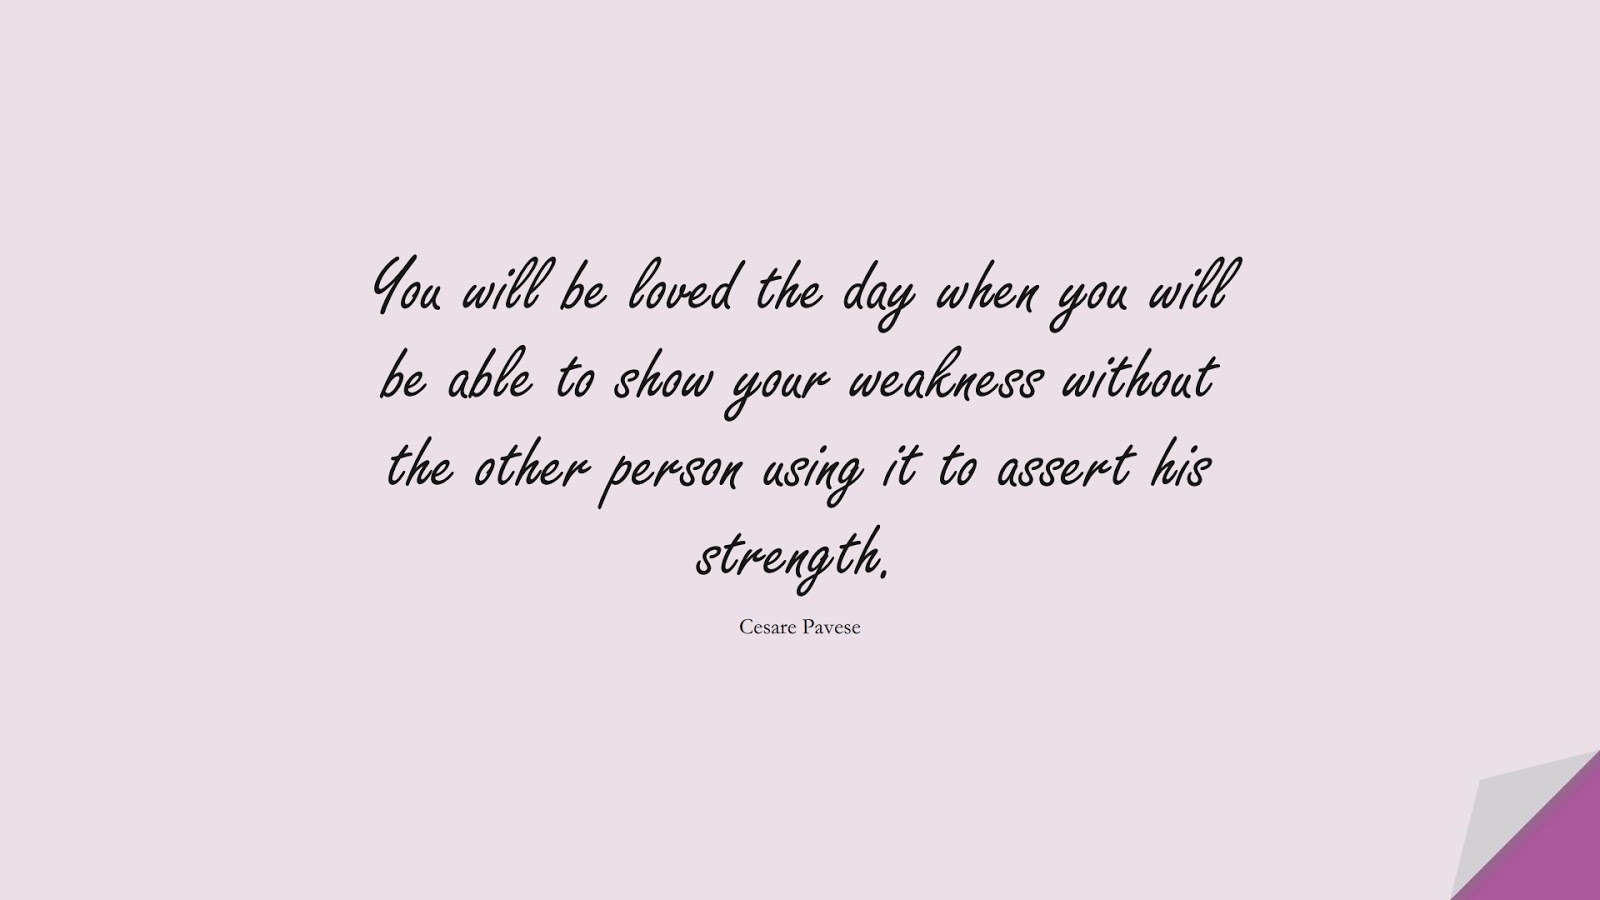 You will be loved the day when you will be able to show your weakness without the other person using it to assert his strength. (Cesare Pavese);  #LoveQuotes